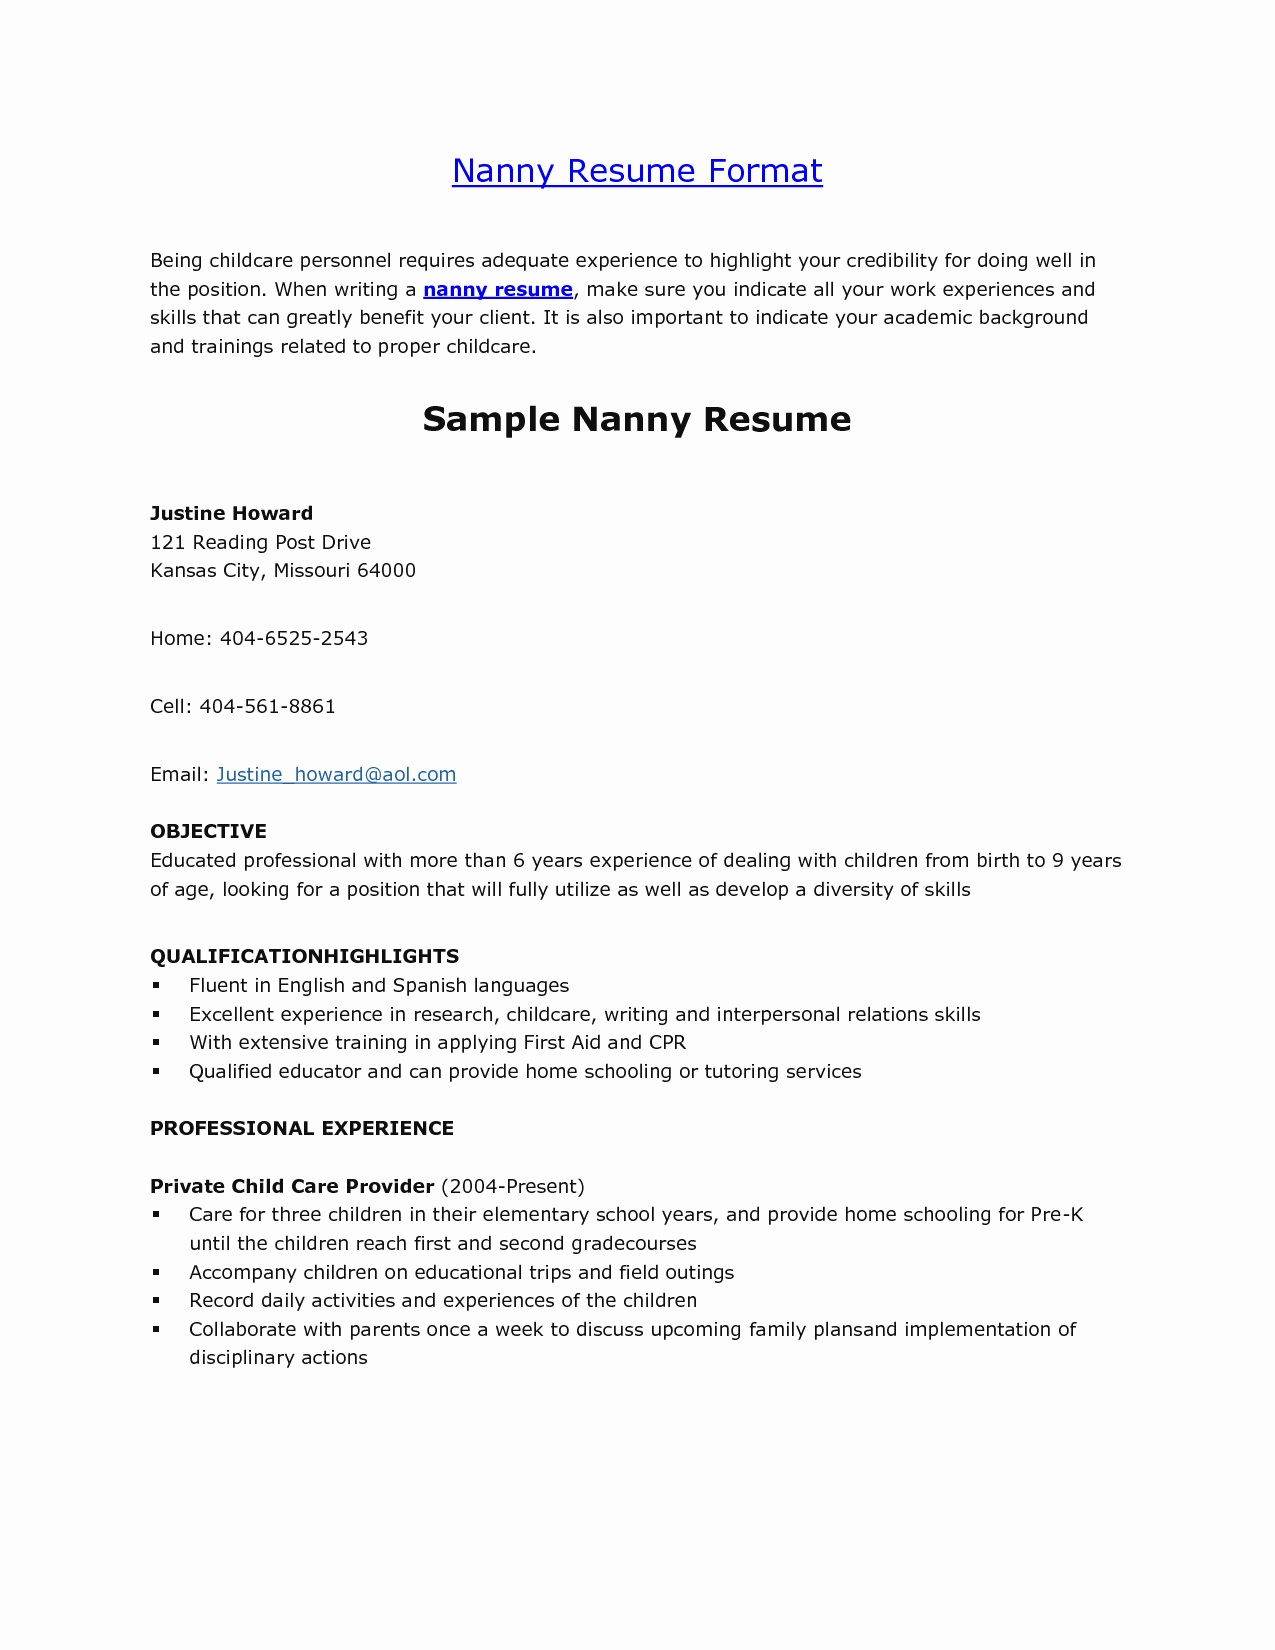 Application for Nanny Position Fresh Nanny Resume Template